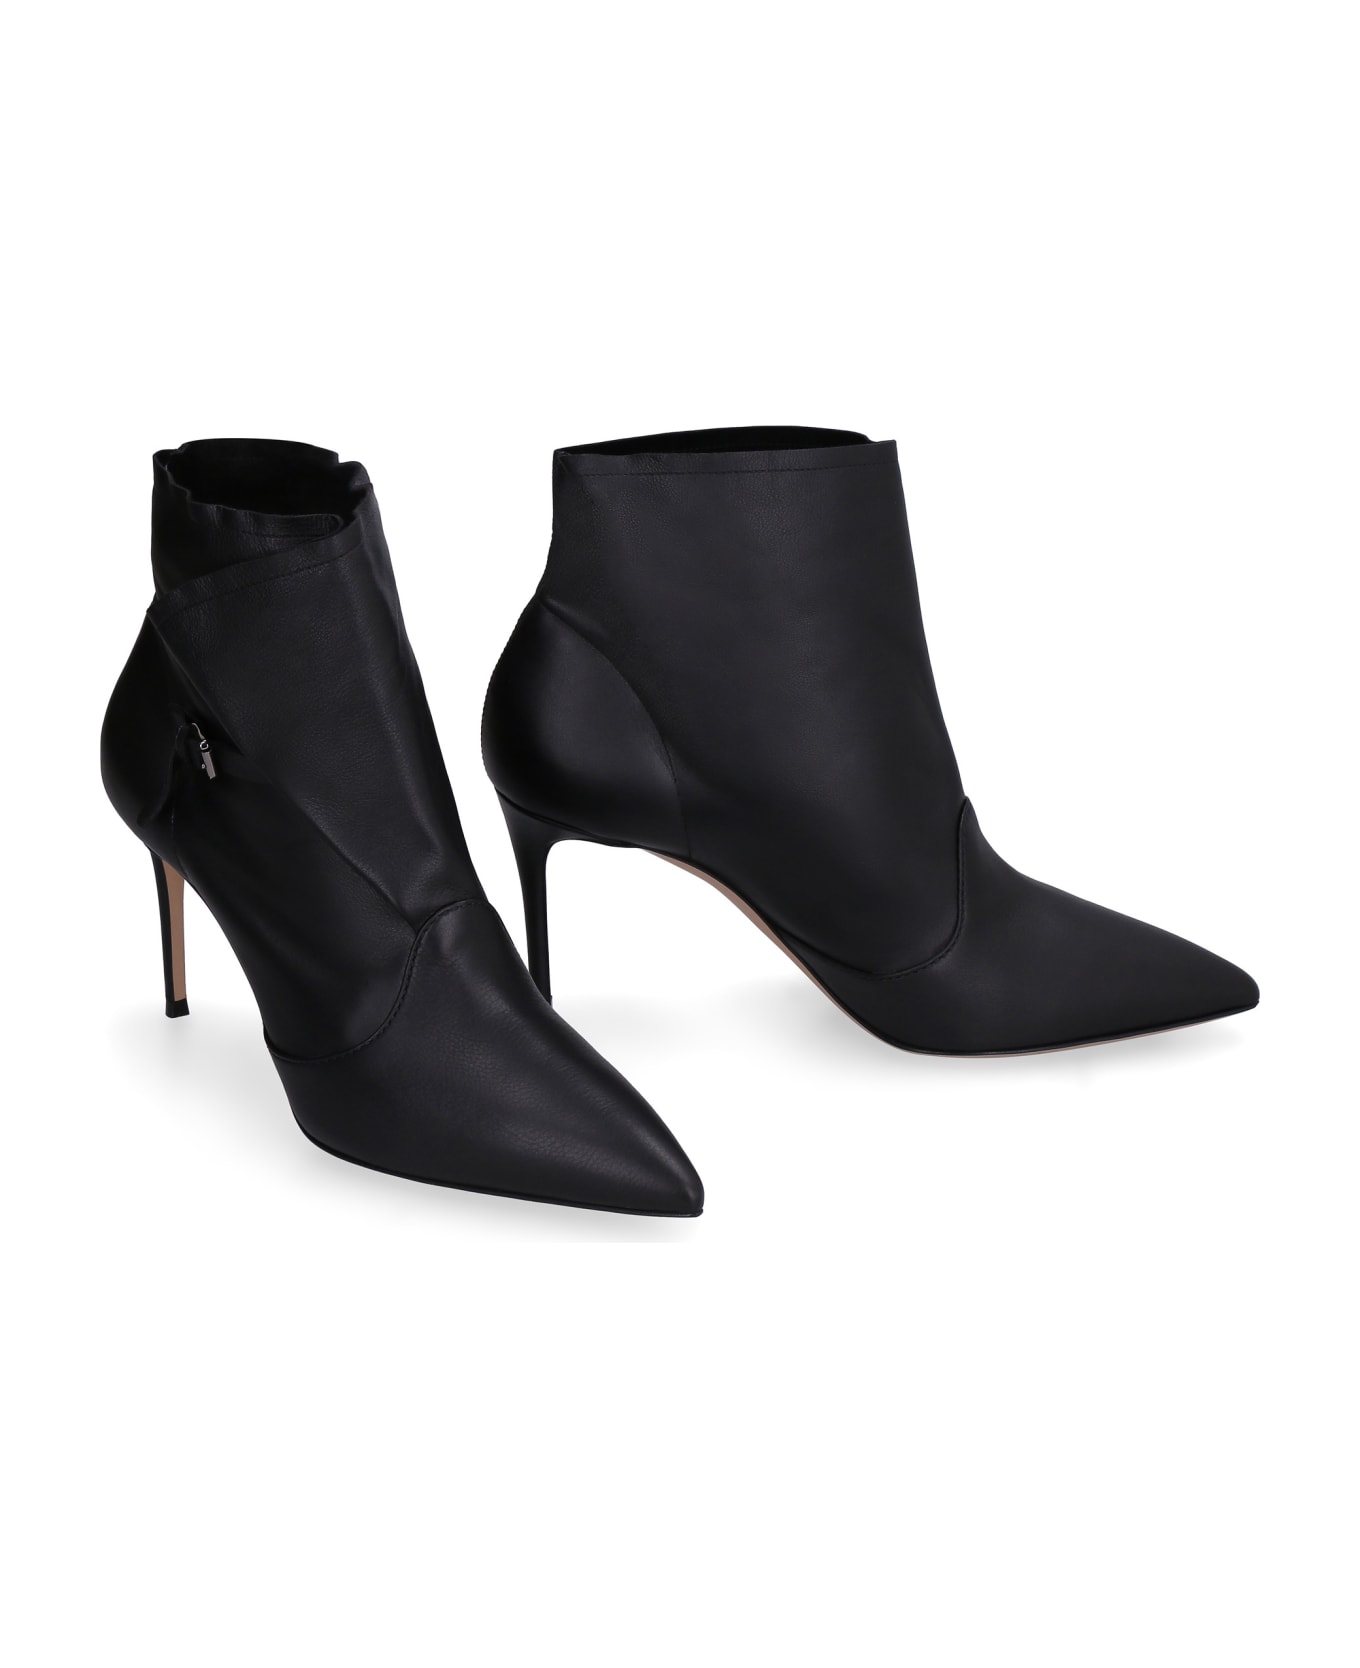 Casadei Leather Ankle Boots - black ブーツ